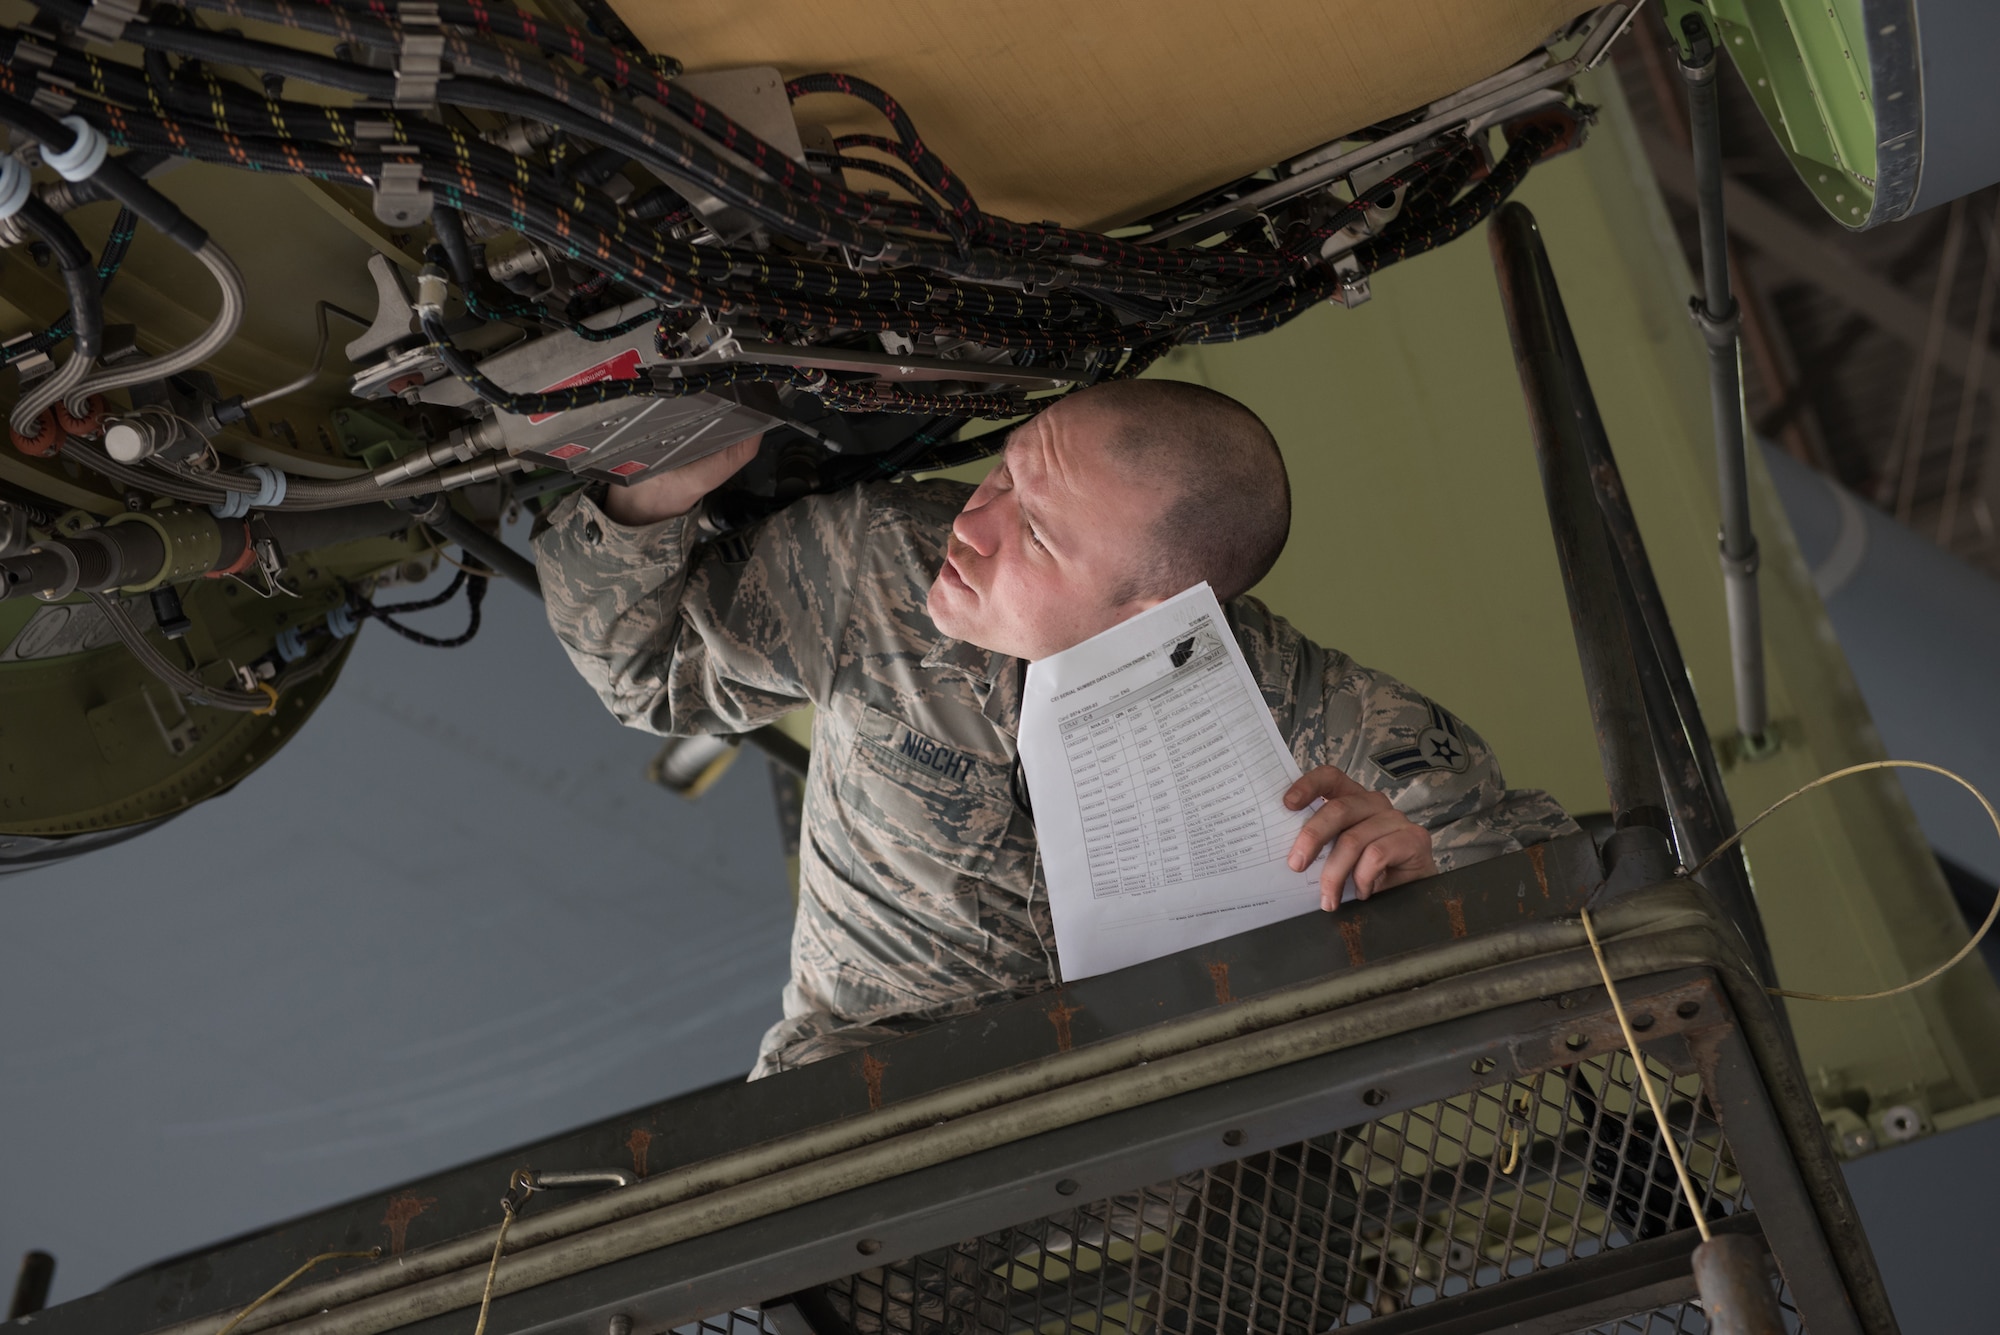 U.S. Air Force Airman 1st Class Kyle Nischt, 60th Aircraft Maintenance Squadron aerospace propulsion journeyman, inspects a C-5M Super Galaxy Jan. 28, 2019 at Travis Air Force Base, Calif. Regular maintenance ensures the C-5 is mission ready and the 60th Maintenance Group's Maintenance Operations Center coordinates all maintenance actions at Travis. (U.S. Air Force photo by Tech. Sgt. James Hodgman)